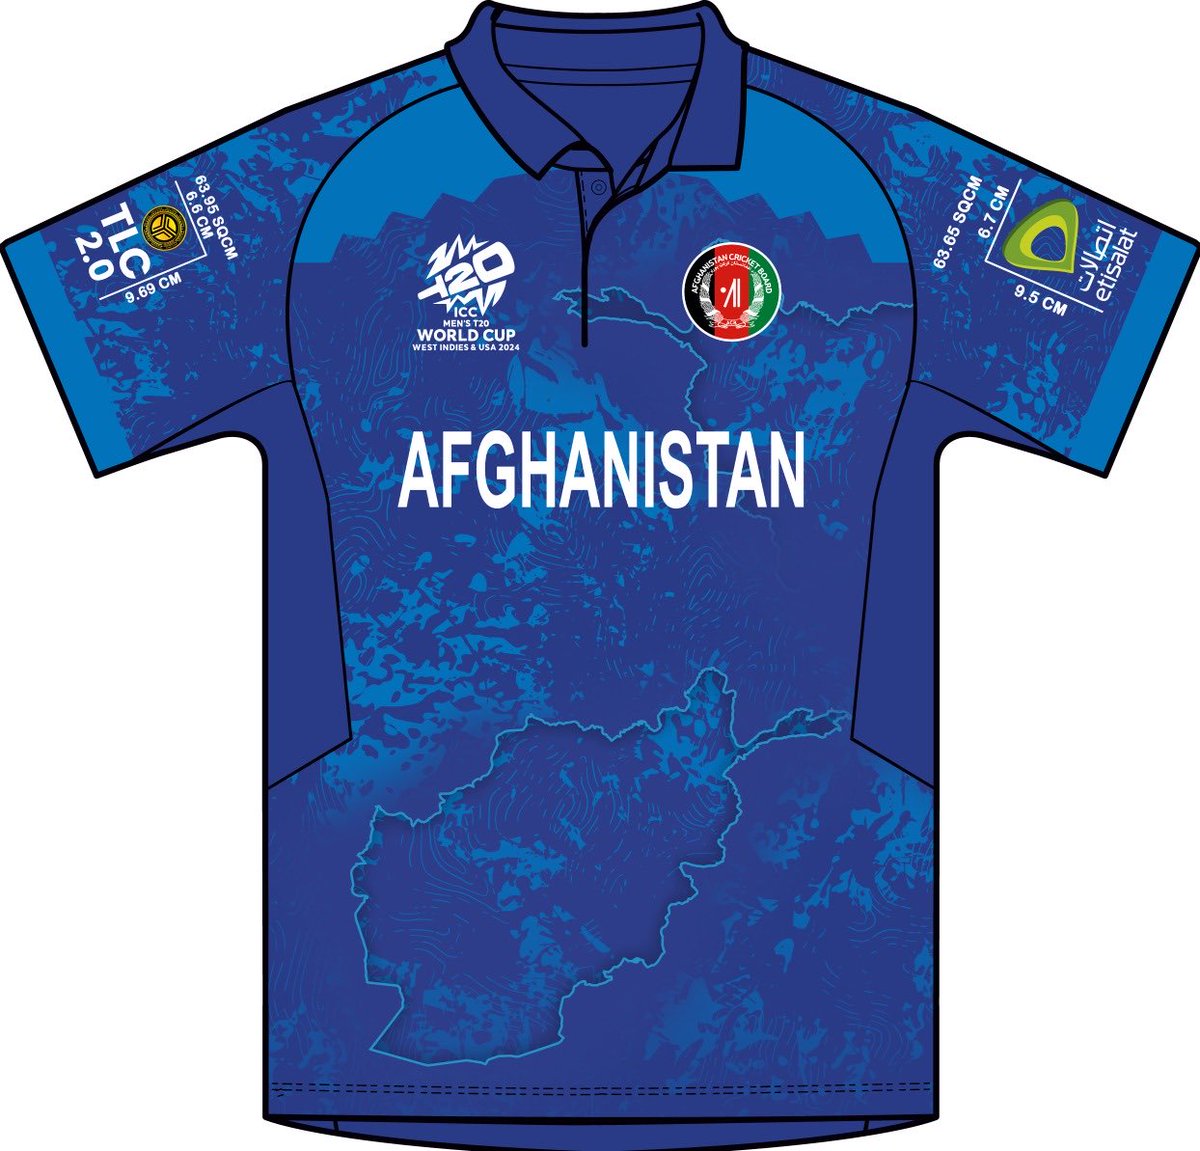 Afghanistan cricket teams’s jersey for the #T20WorldCup. What do you think of the trendy design?